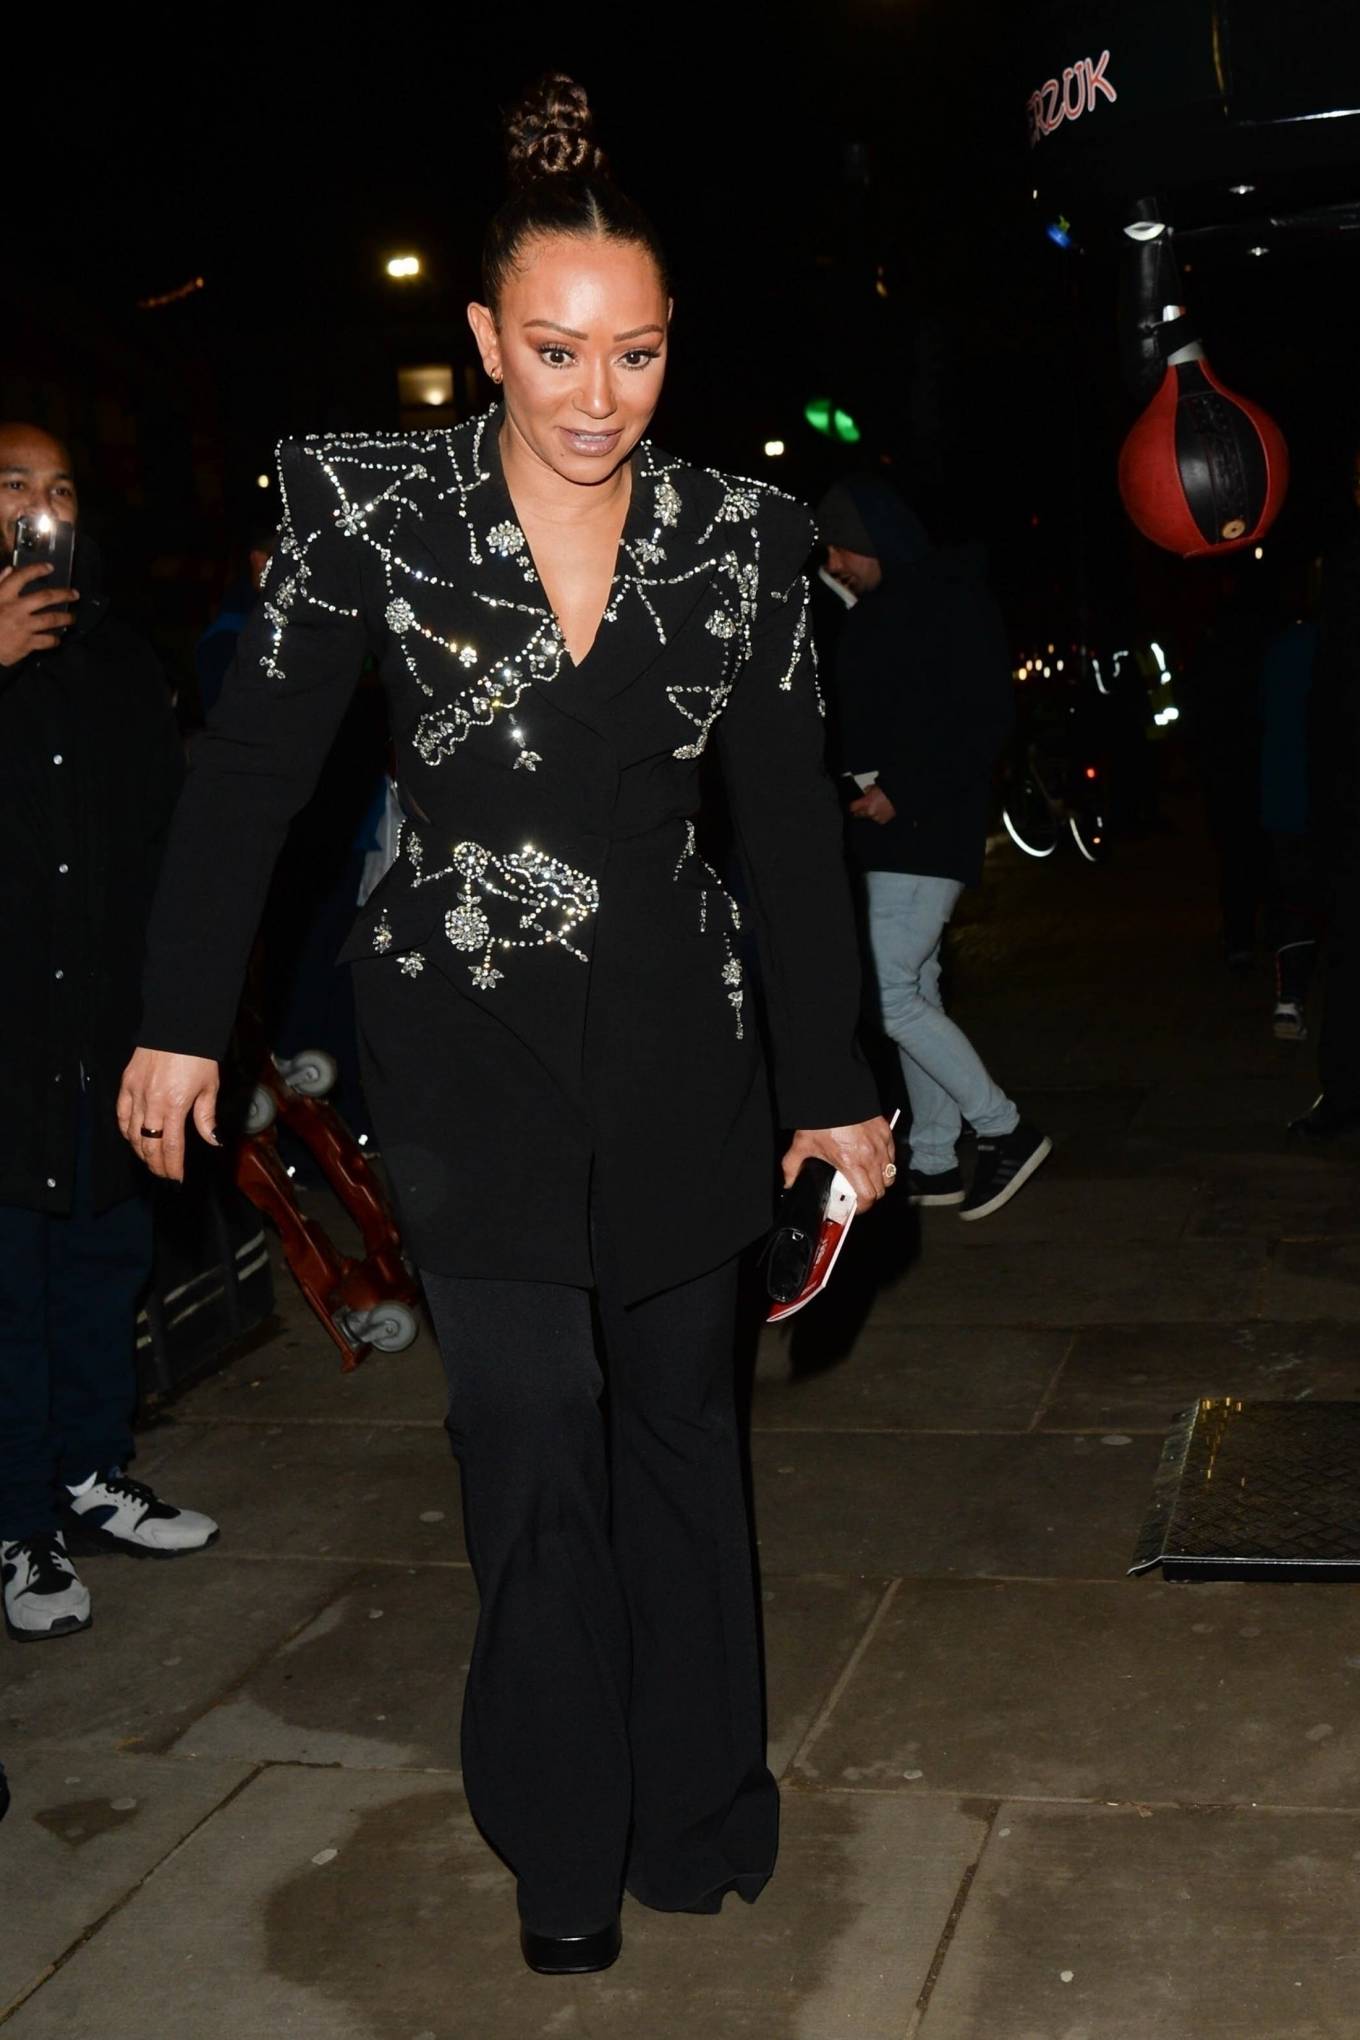 Melanie Brown - The Sun's 'Who Cares Wins' Awards 2022 in London